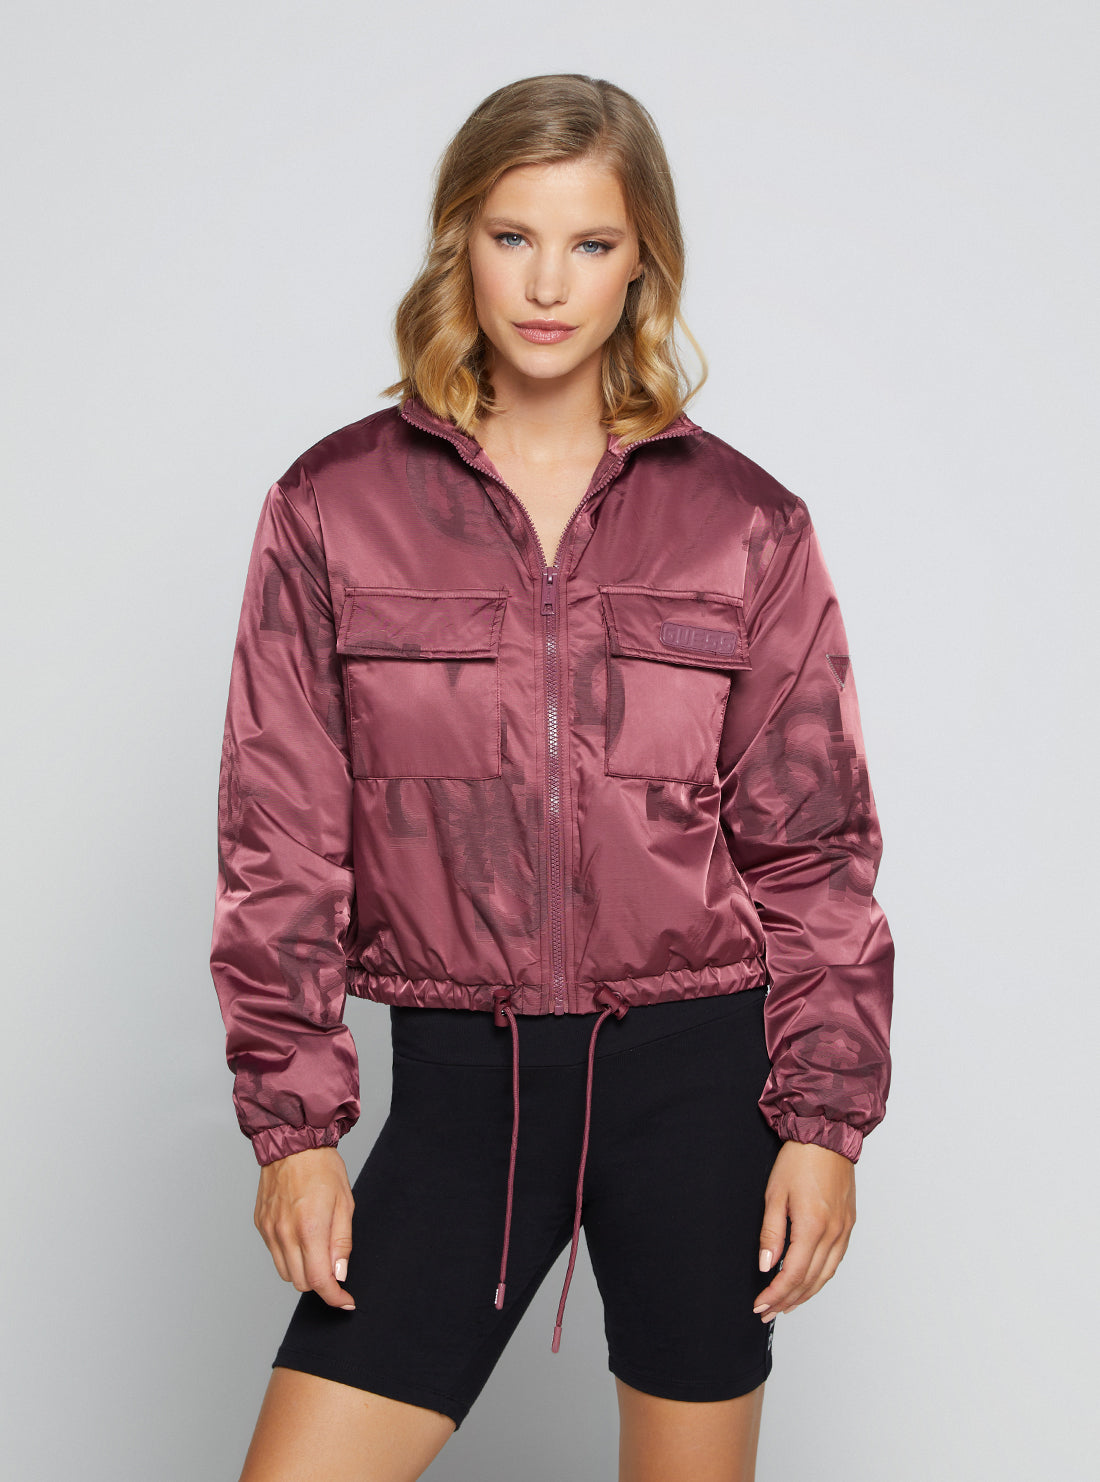 GUESS Women's Peony Jacquard Evette Padded Logo Jacket V2BL07WEYU0 Front View